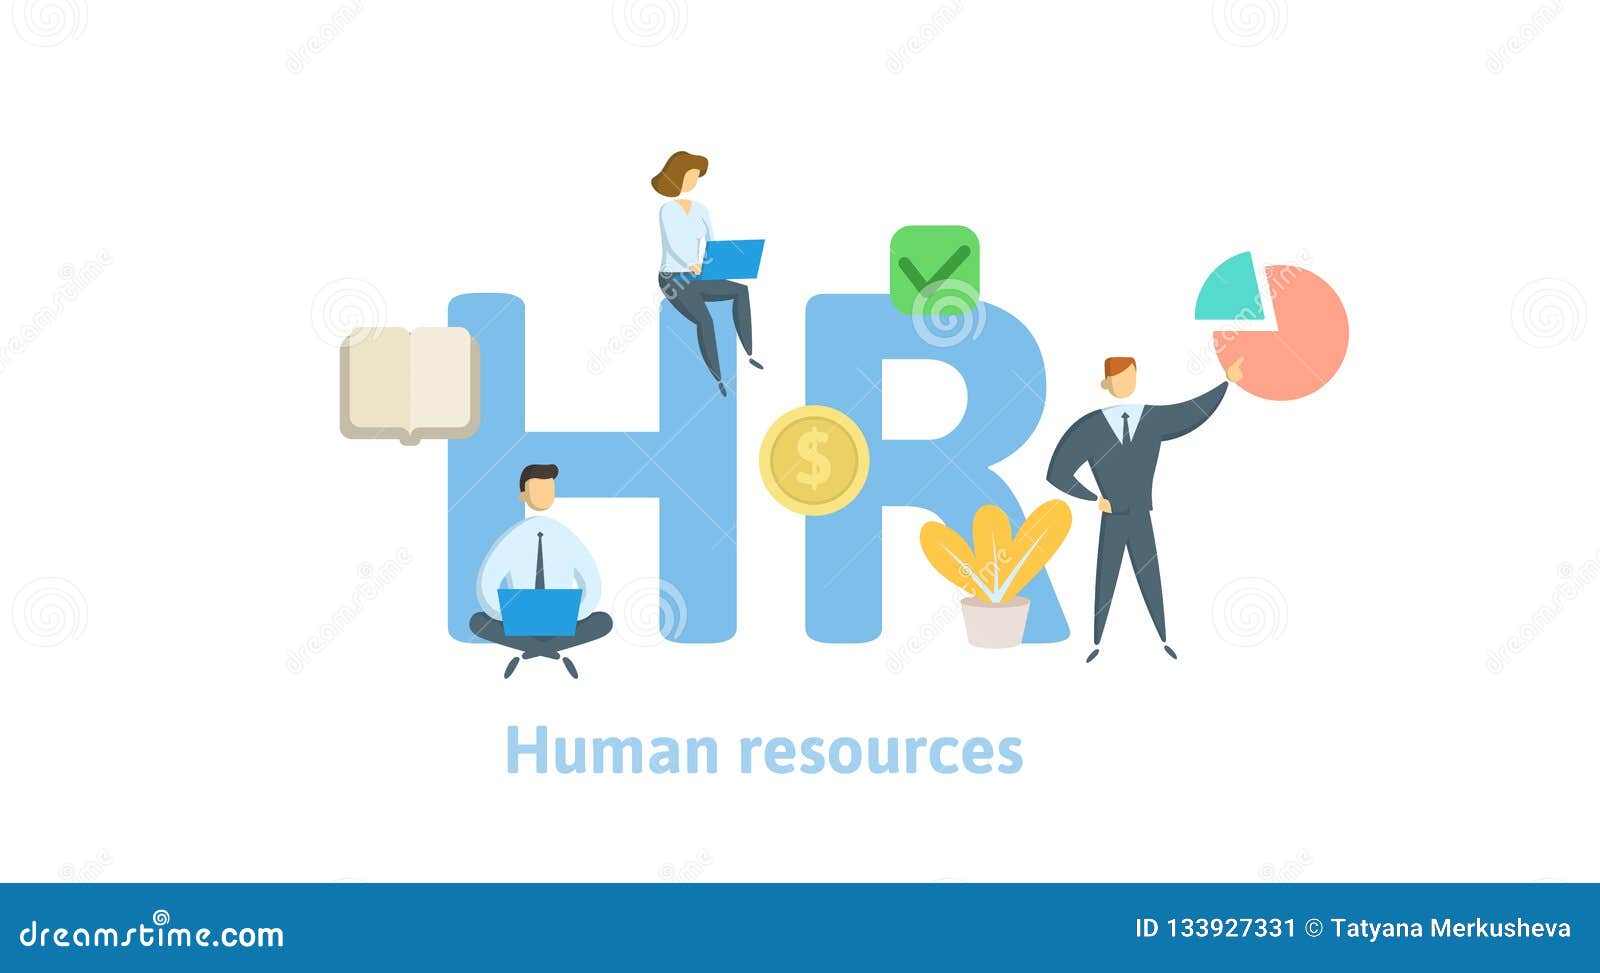 Hr Human Resources Concept With Keywords Letters And Icons Flat